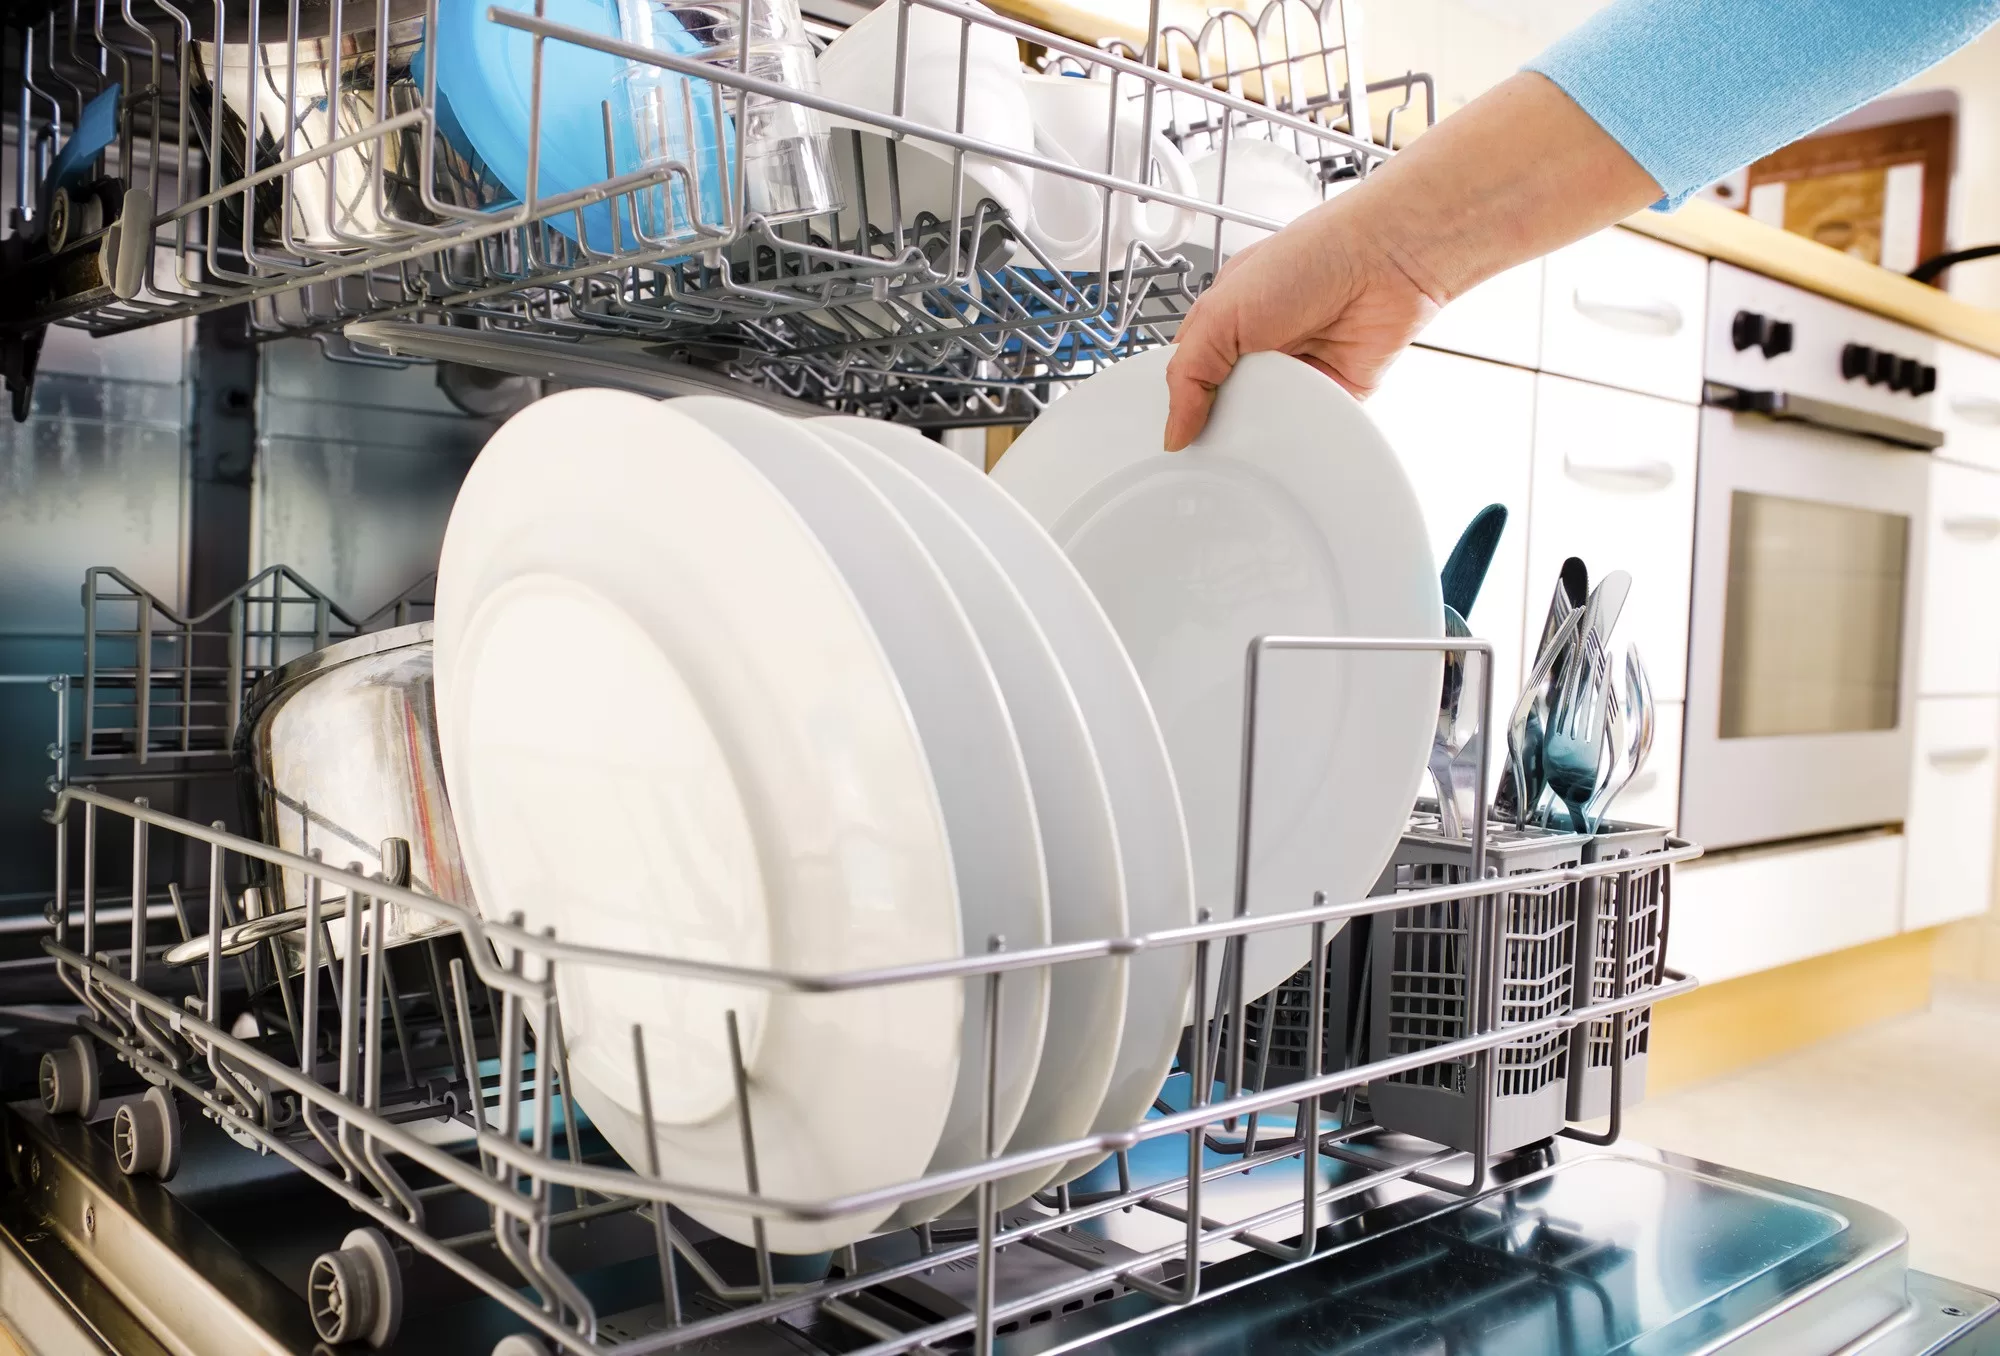 image - Factors To Consider Before Buying a Dishwasher